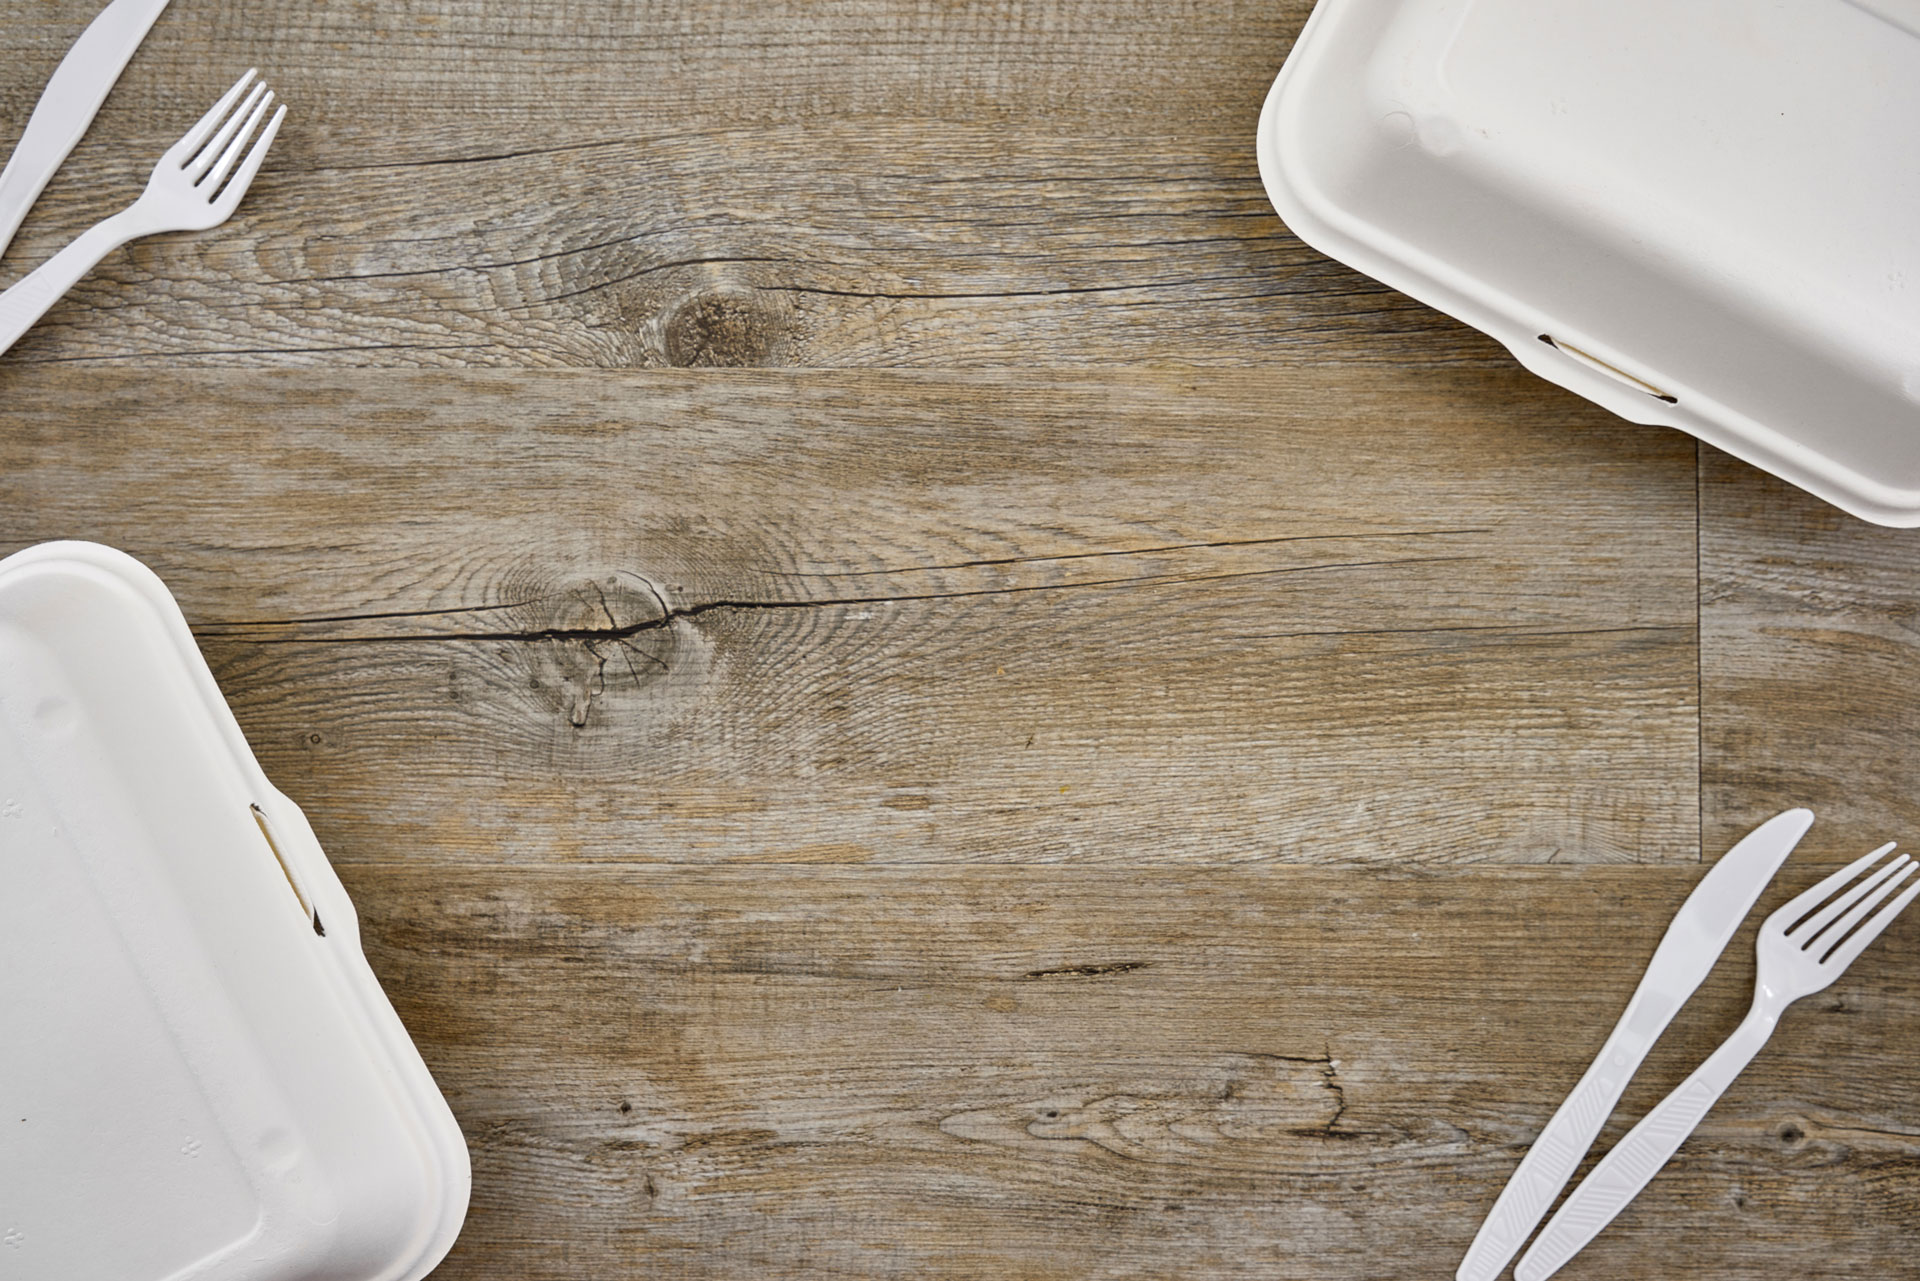 Biodegradable plastic containers and biodegradable plastic cutlery on a wooden surface.